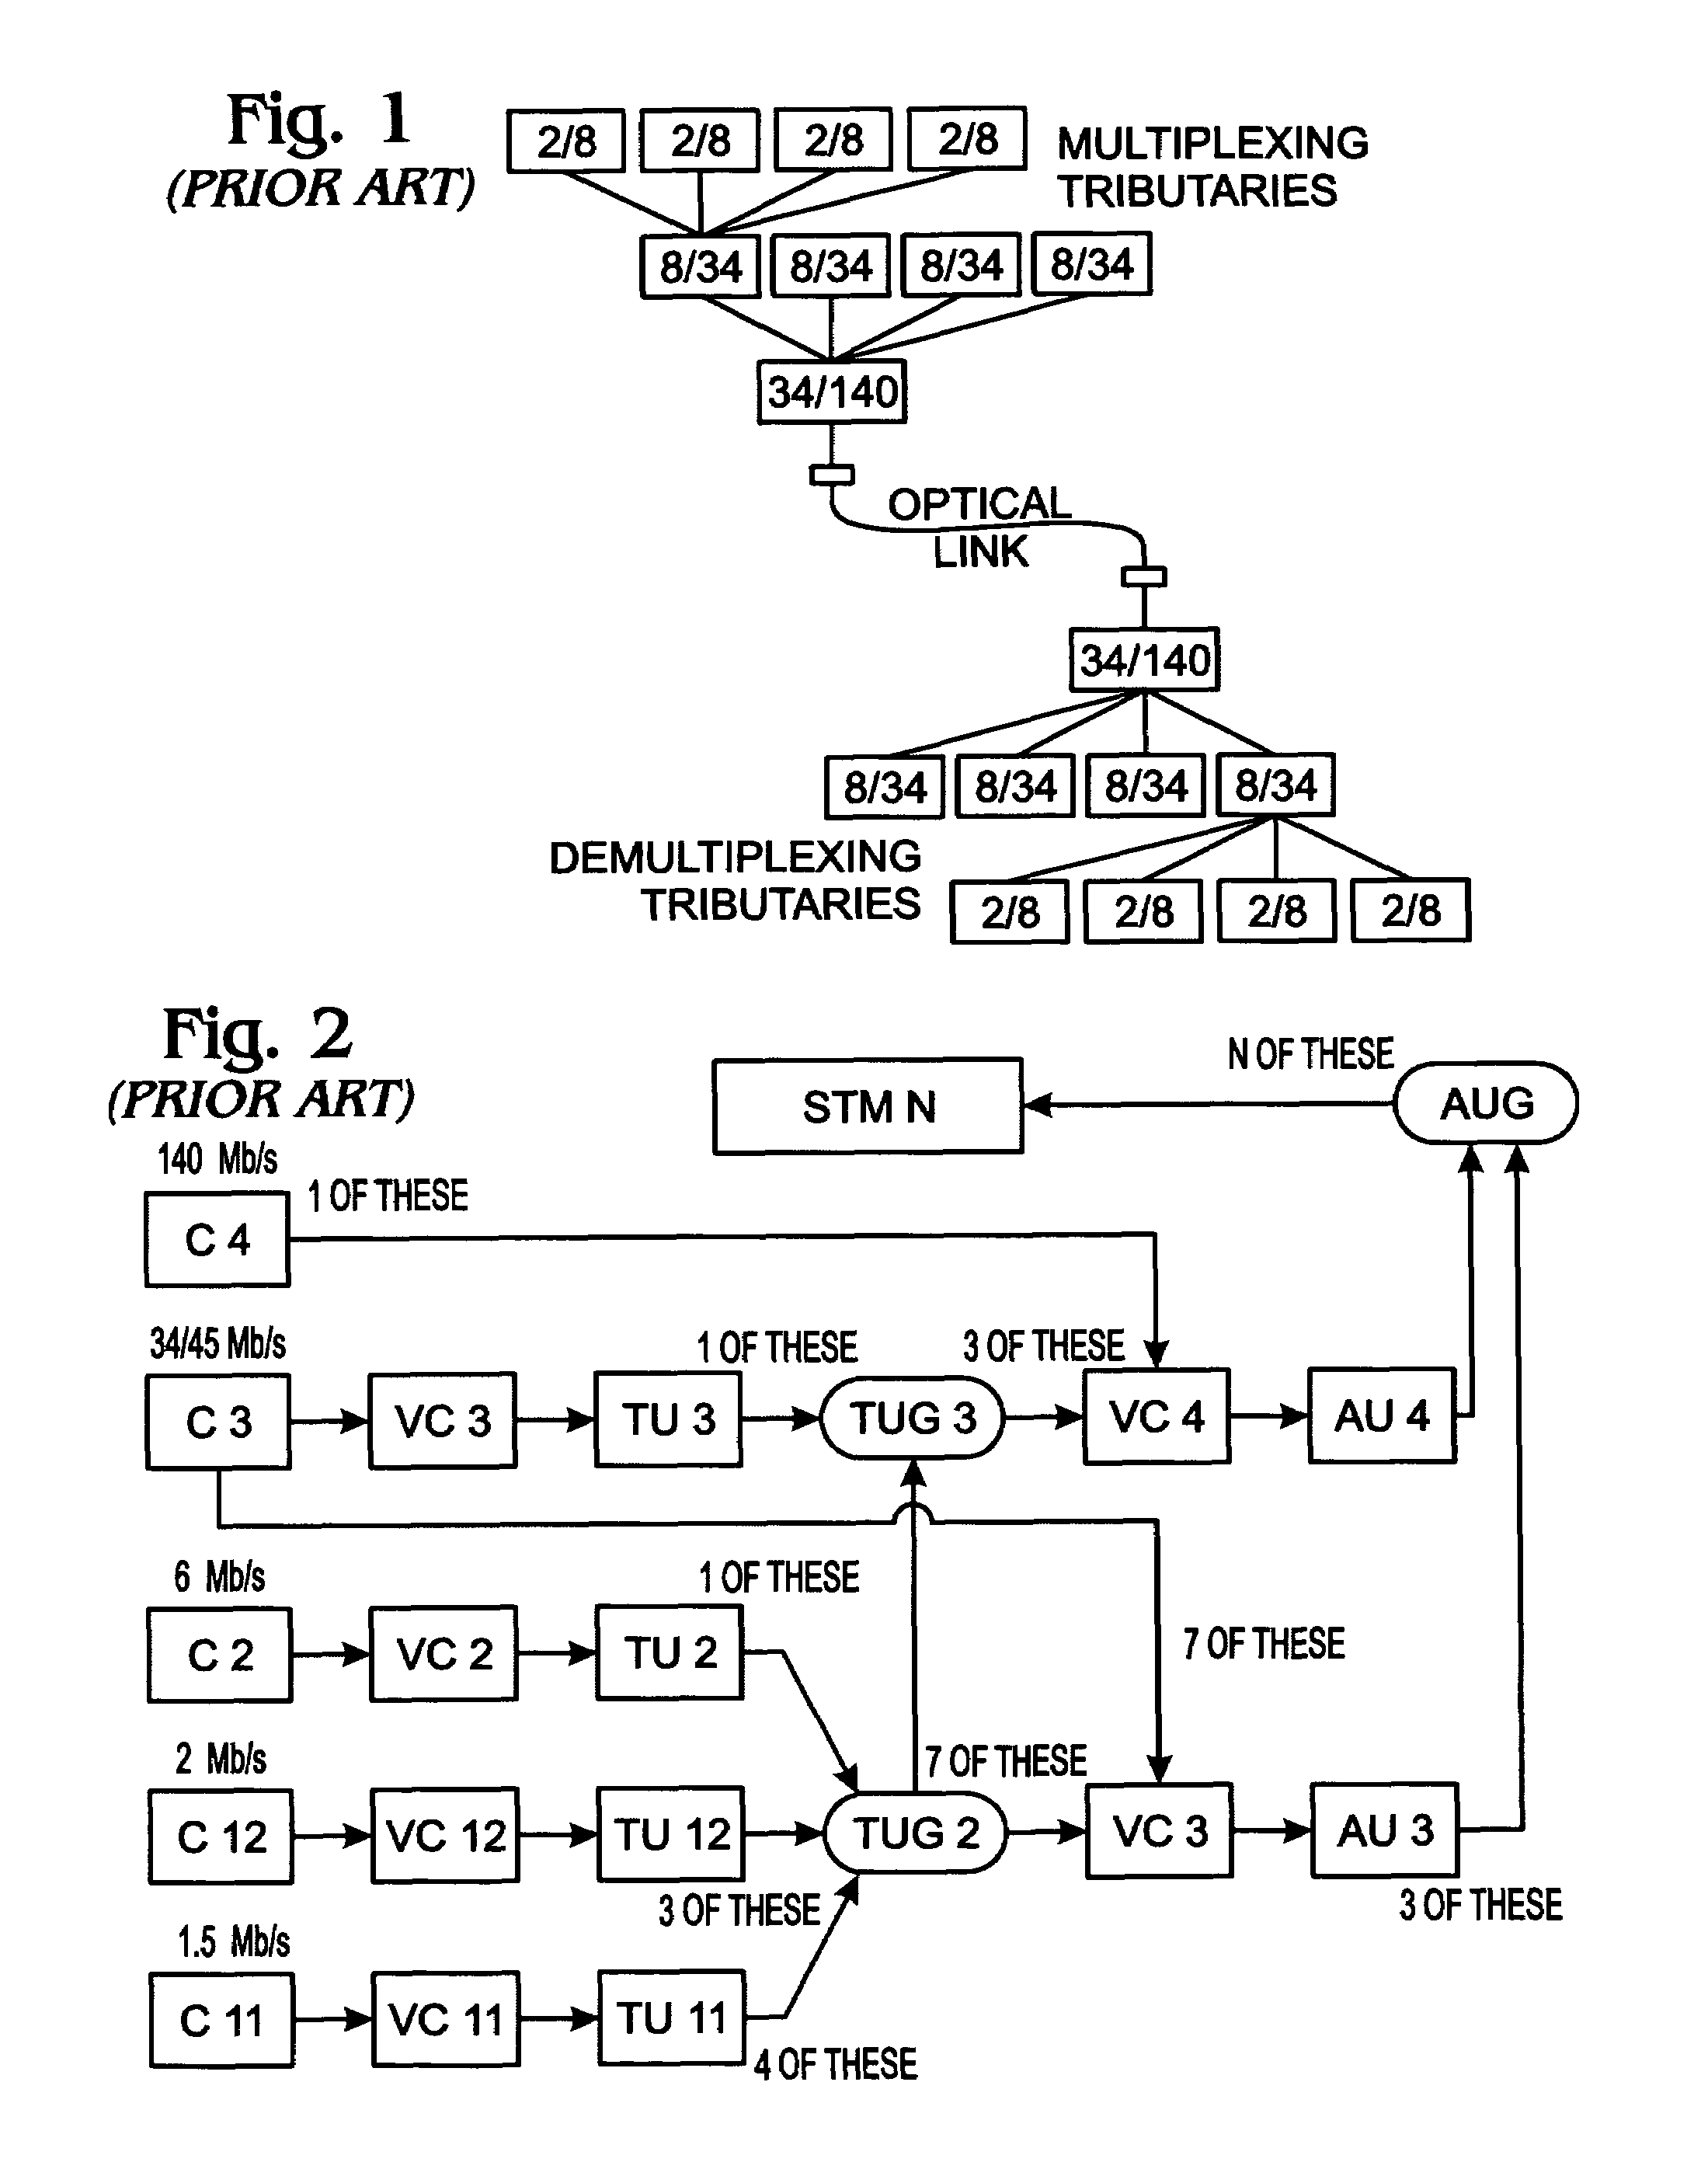 Flexible tributary interface with serial control line